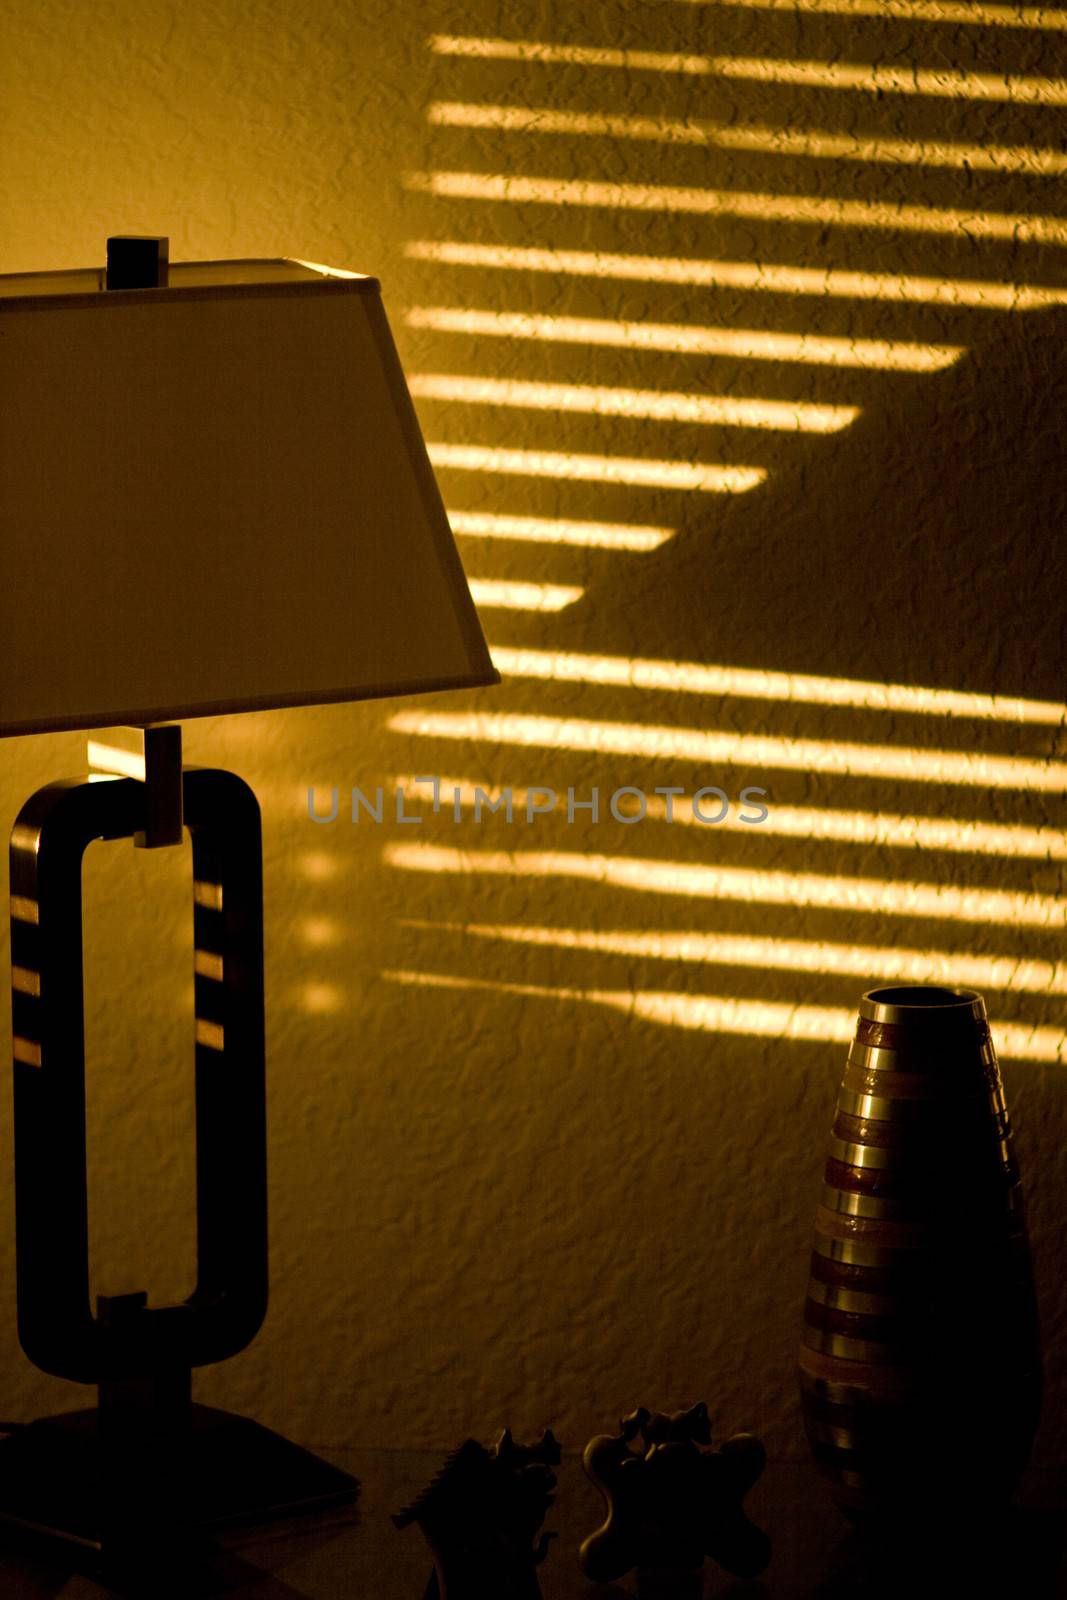 Dark room with stripes of sunshine pattern on the wall. Sun is shining in through window blinds.